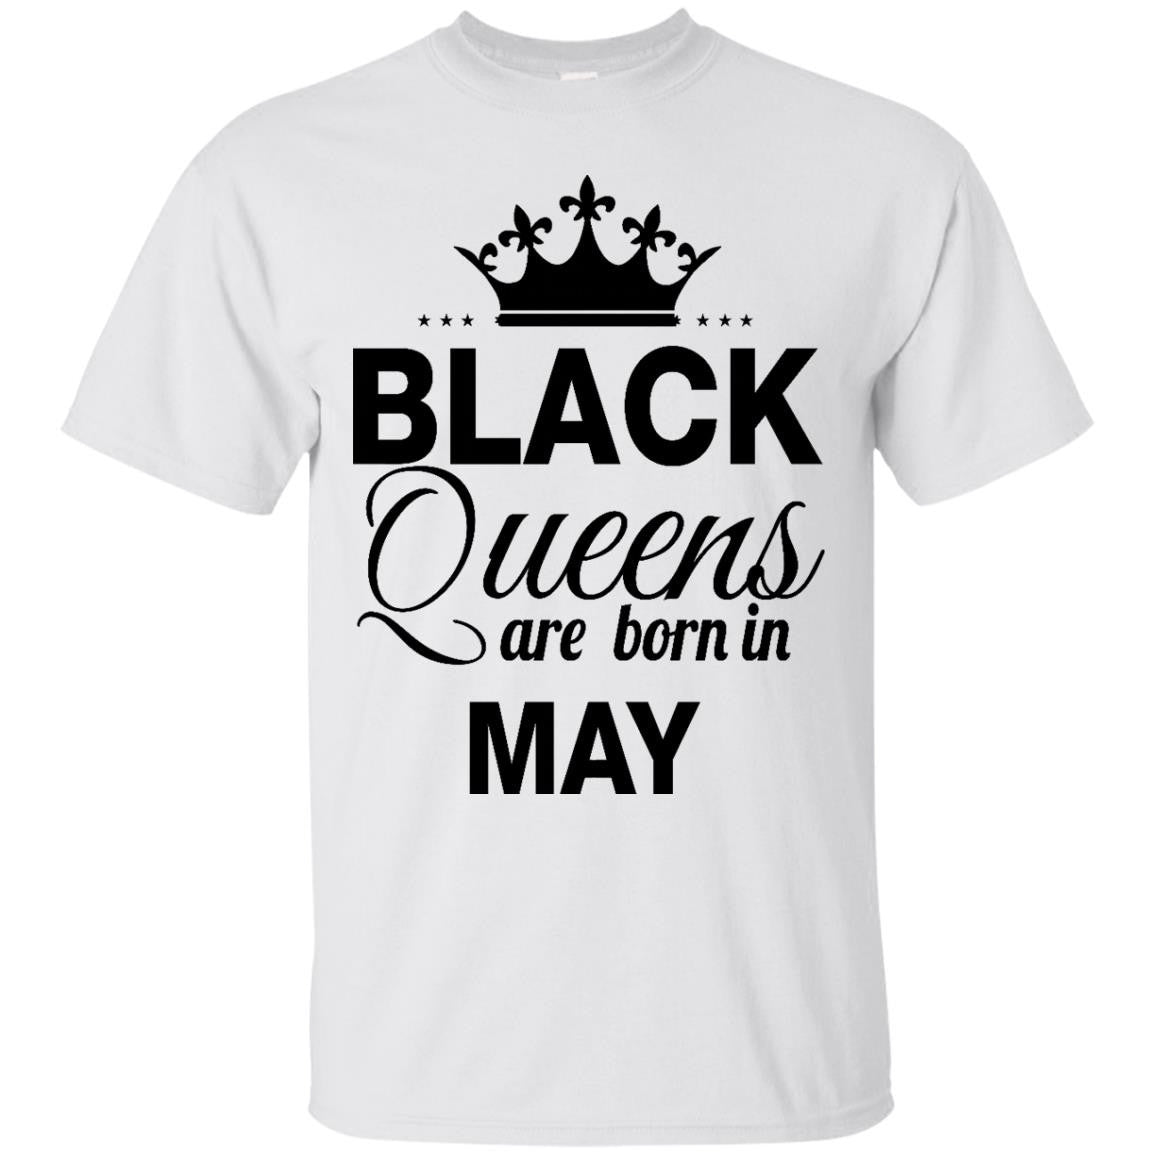 Black Queen are born in May shirt, tank top, hoodie